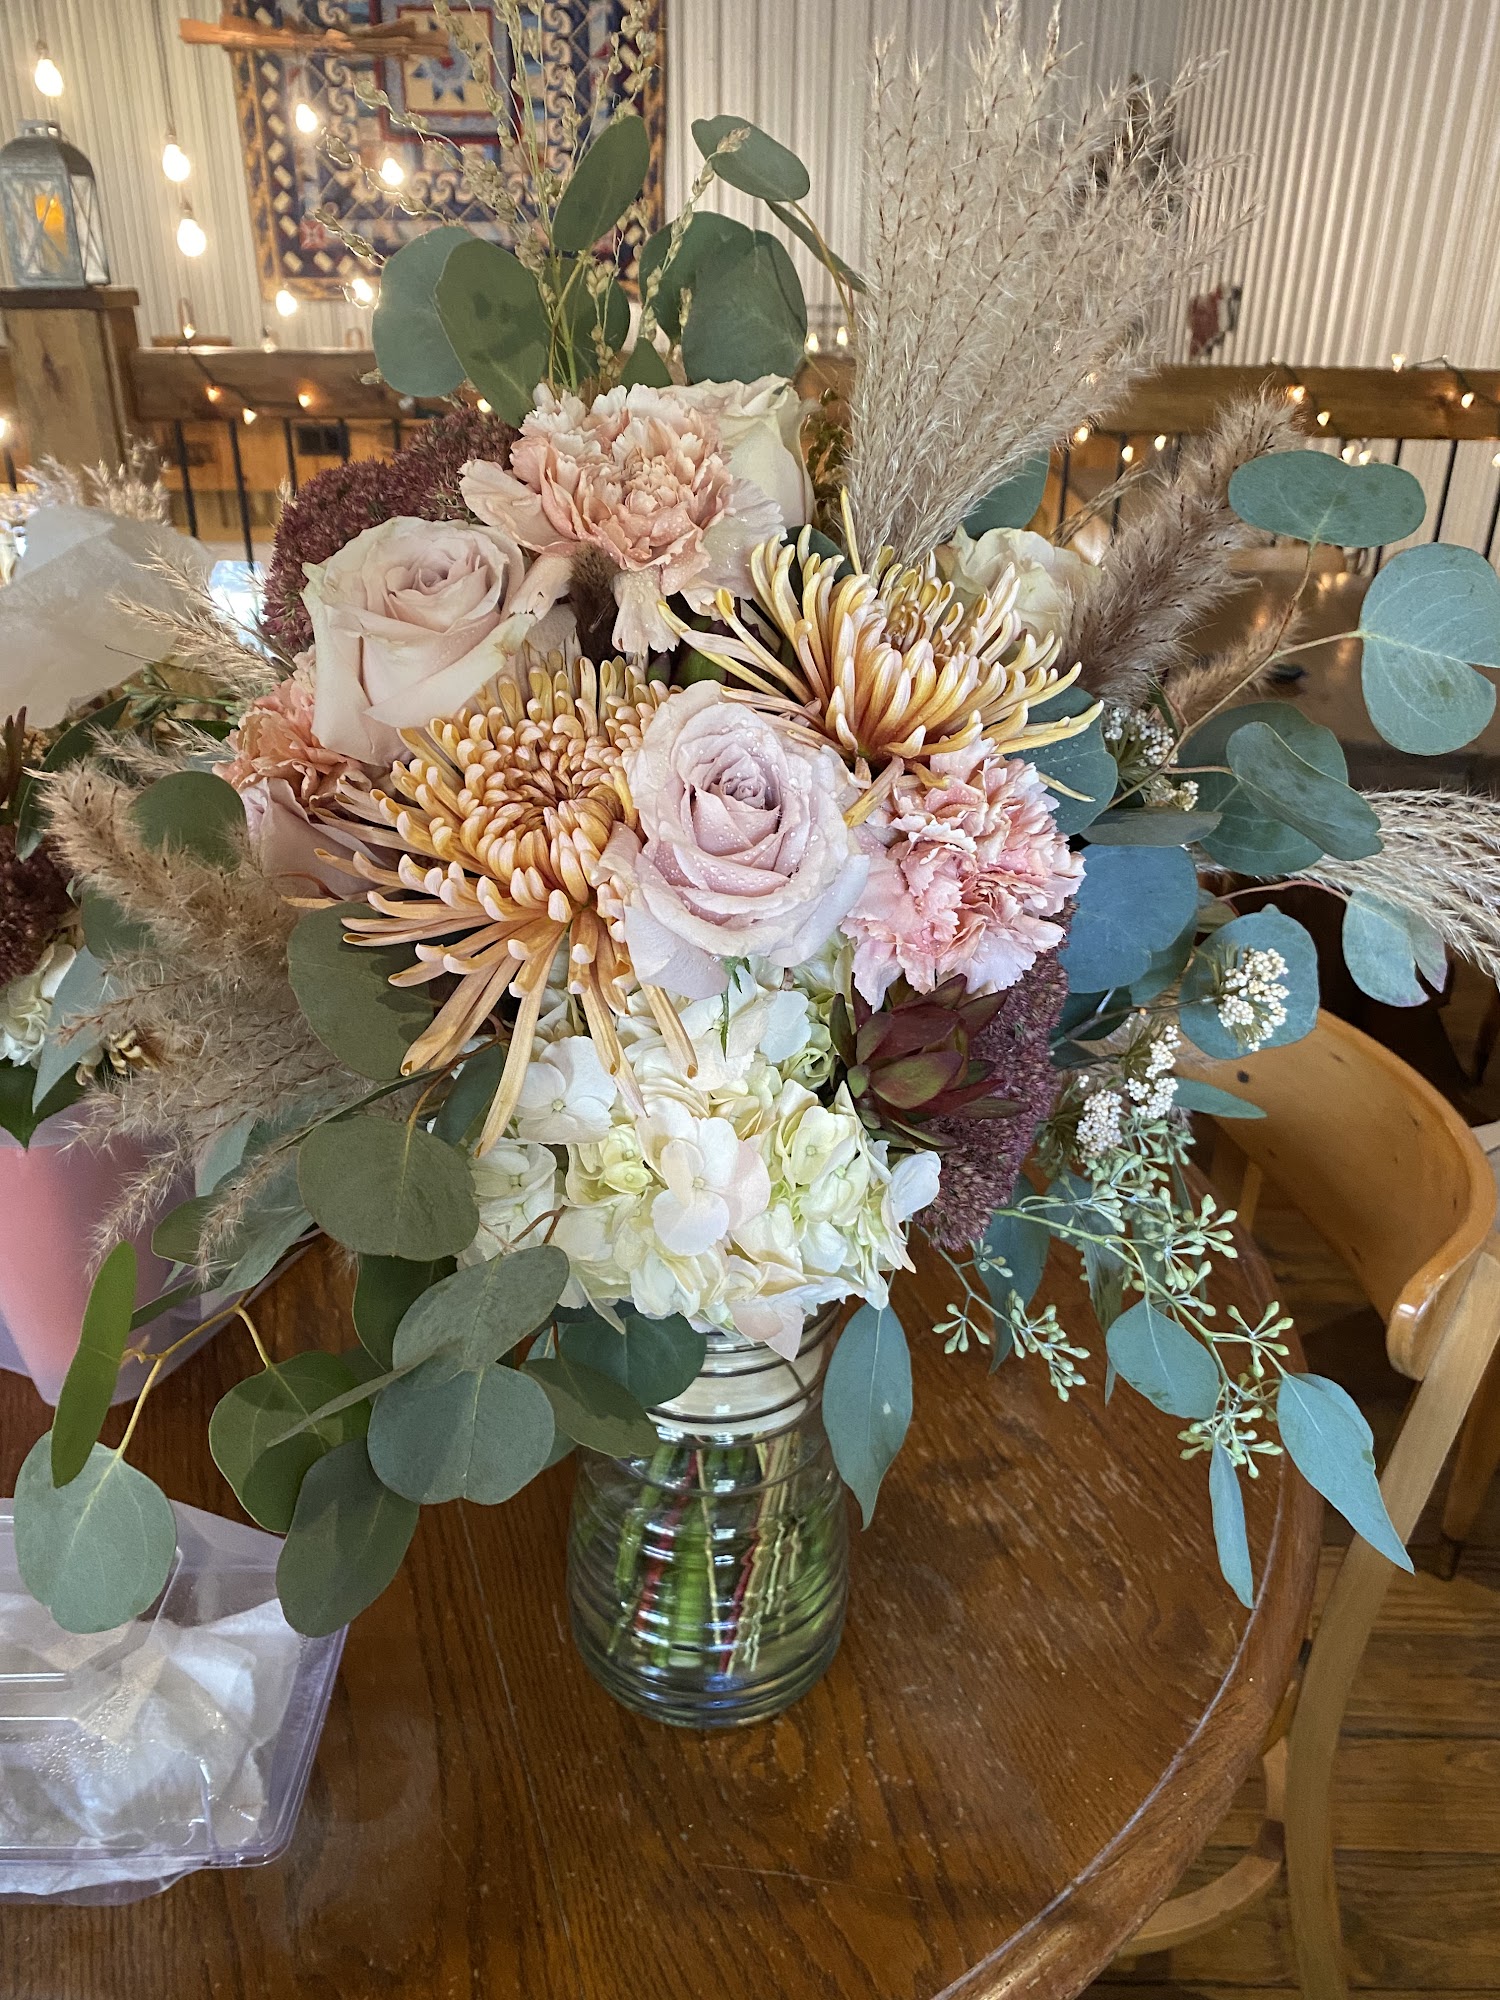 The Flower Shop For All Occasions, Inc. 117 W Newton St, Versailles Missouri 65084